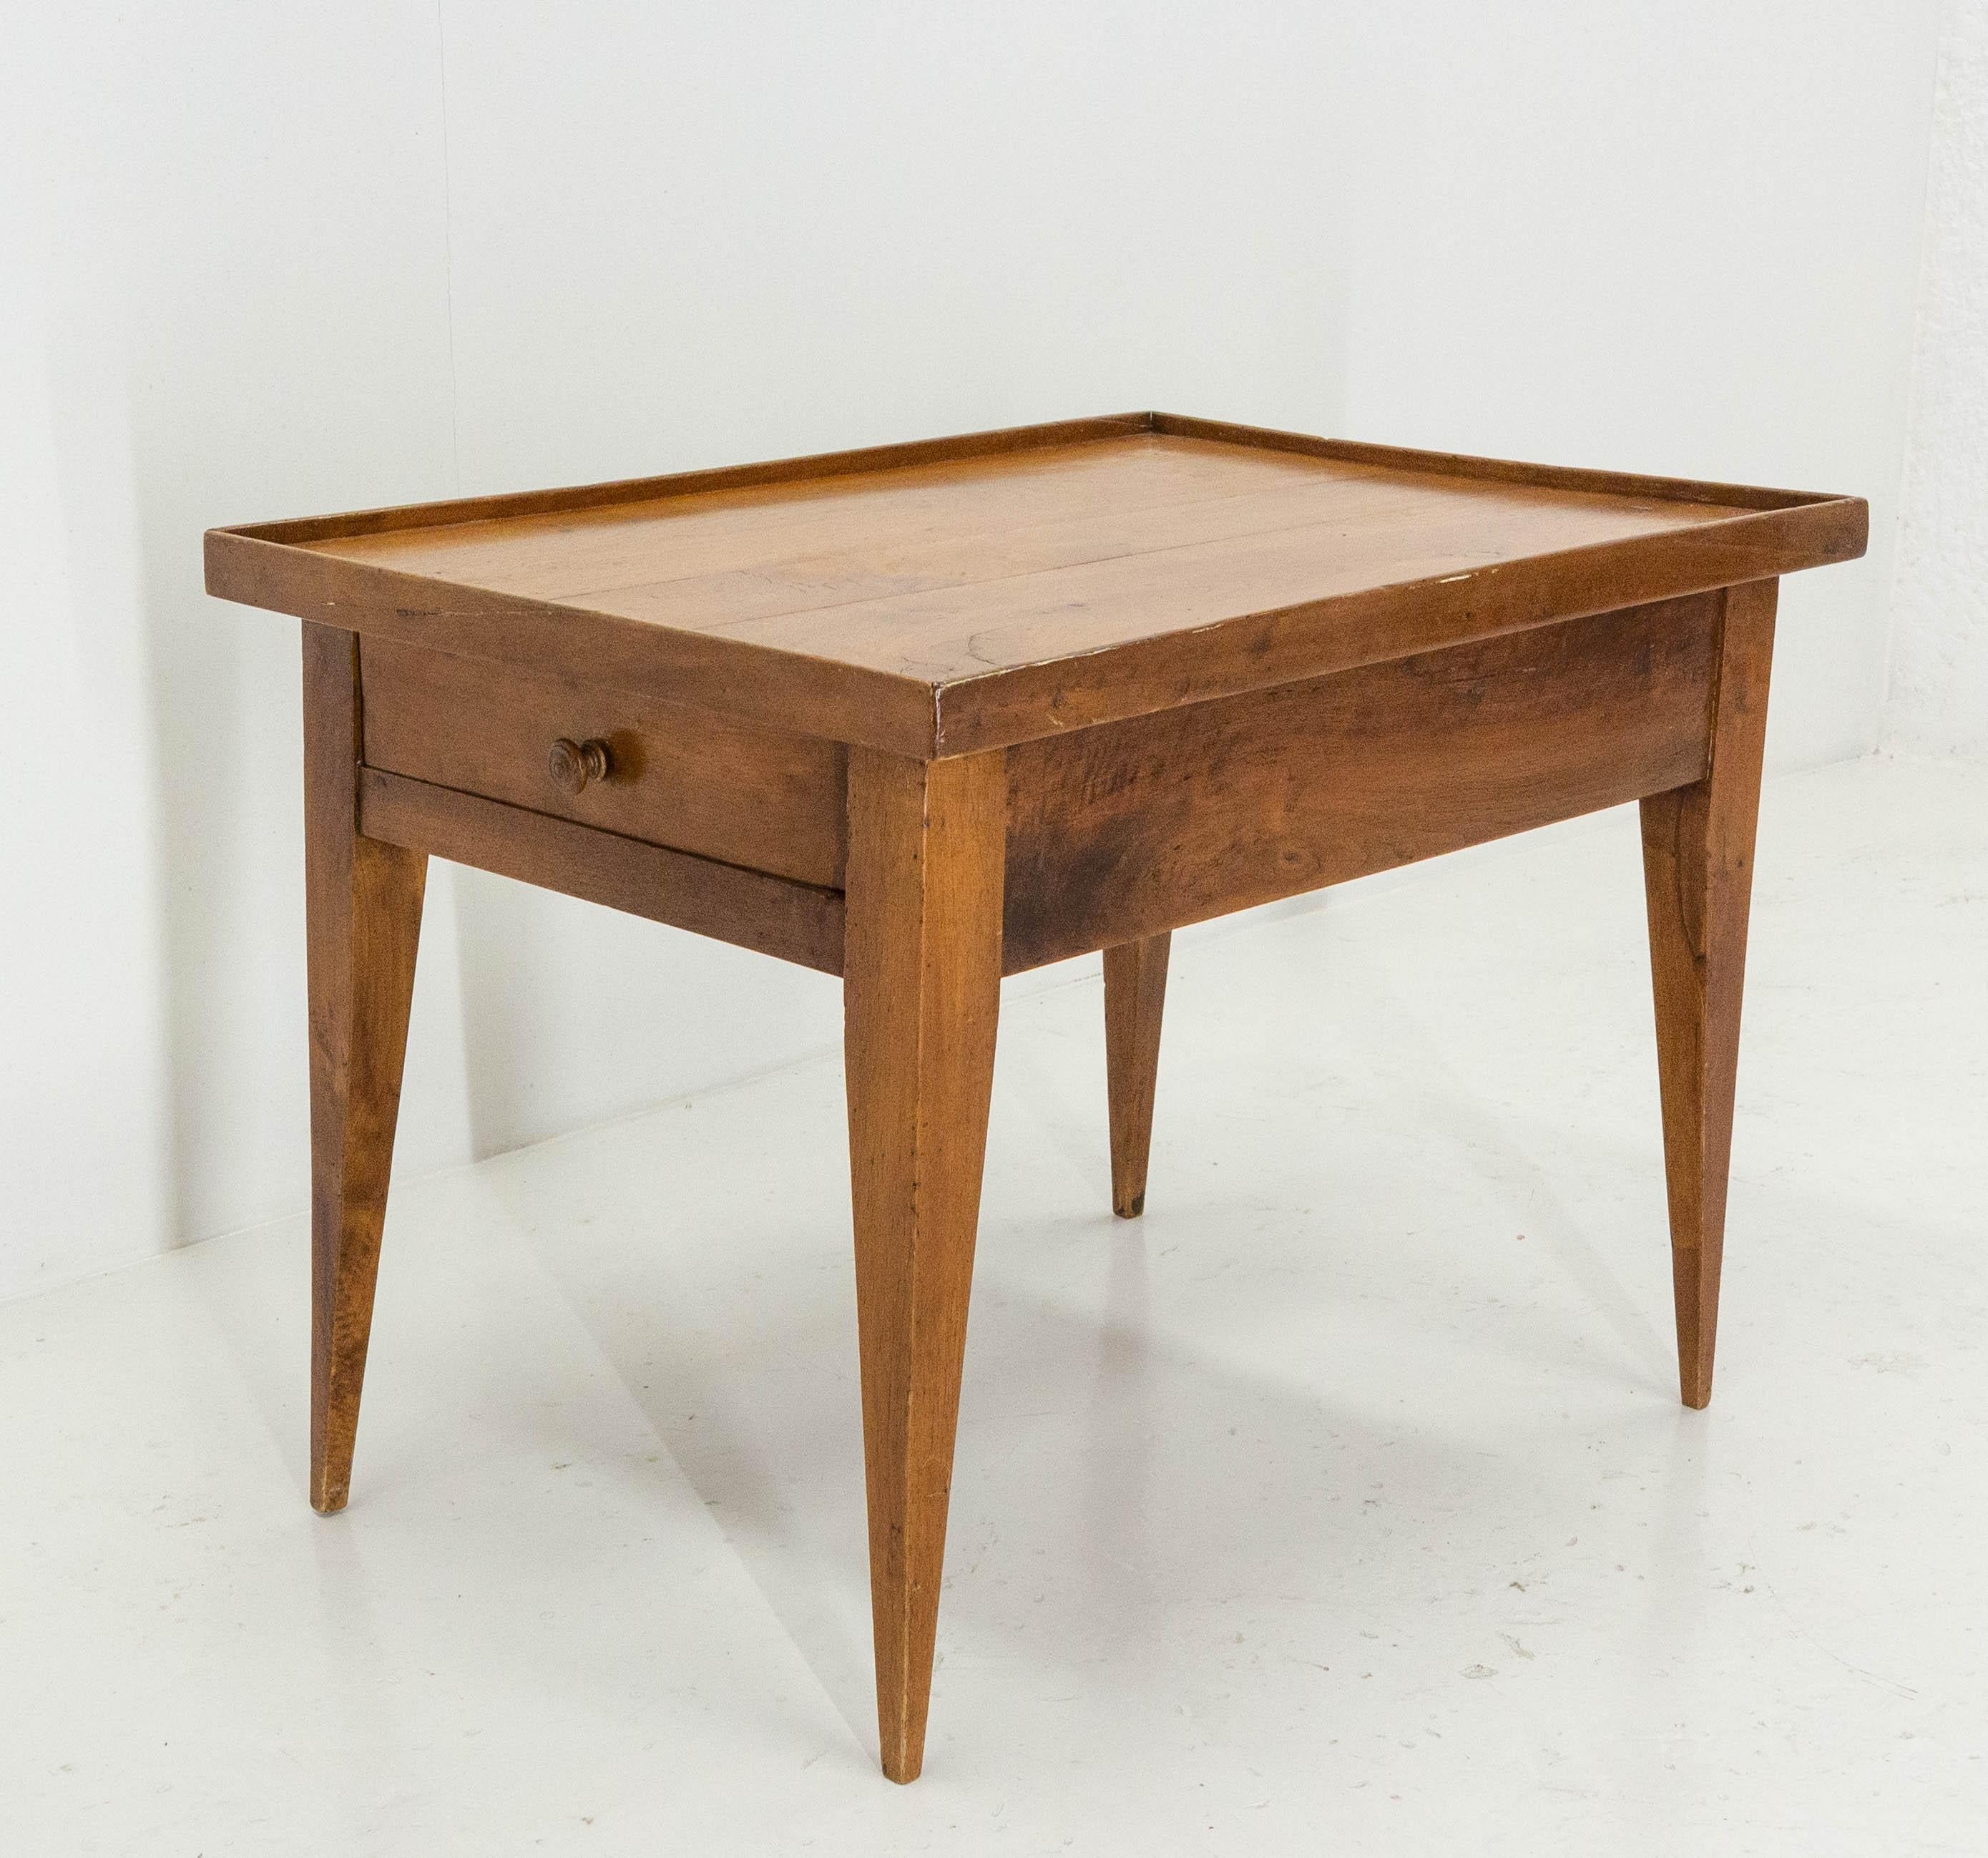 French Cherrywood Coffee Table with Drawers Country Style, Late 19th Century For Sale 3